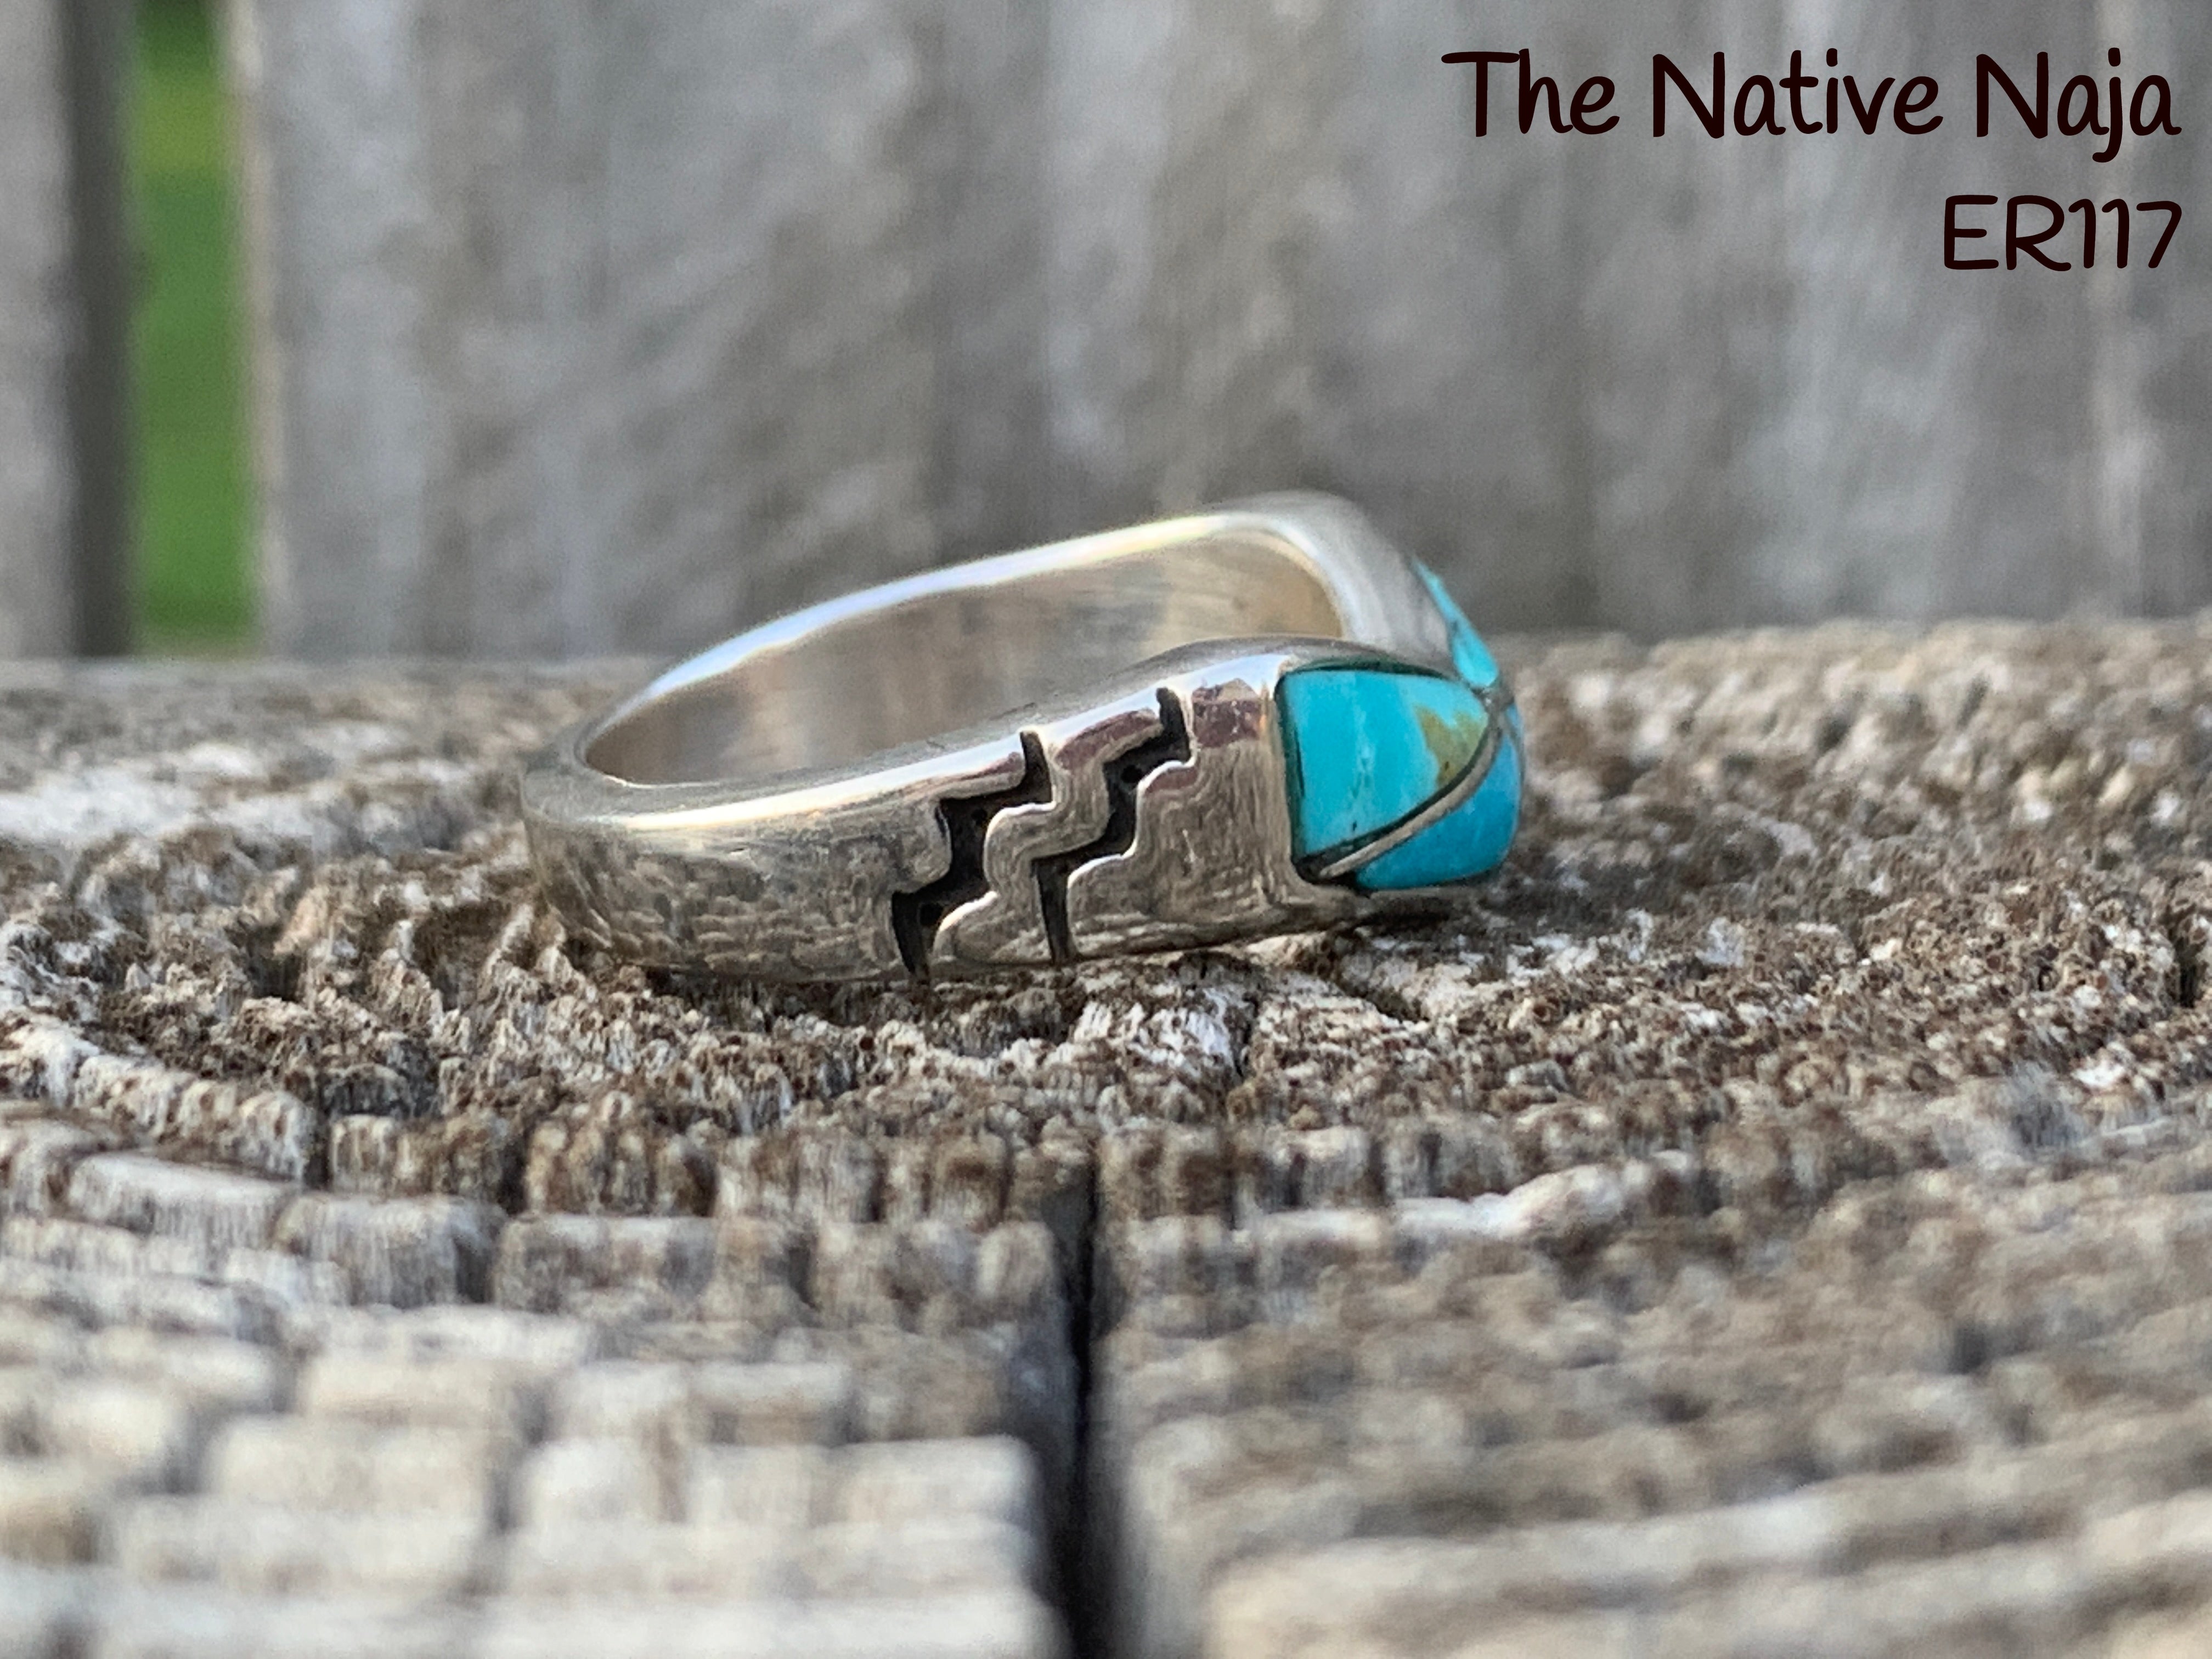 Zuni Genuine Sterling Silver & Turquoise Inlay Stackable Band Ring Size 6 1/2 RG117